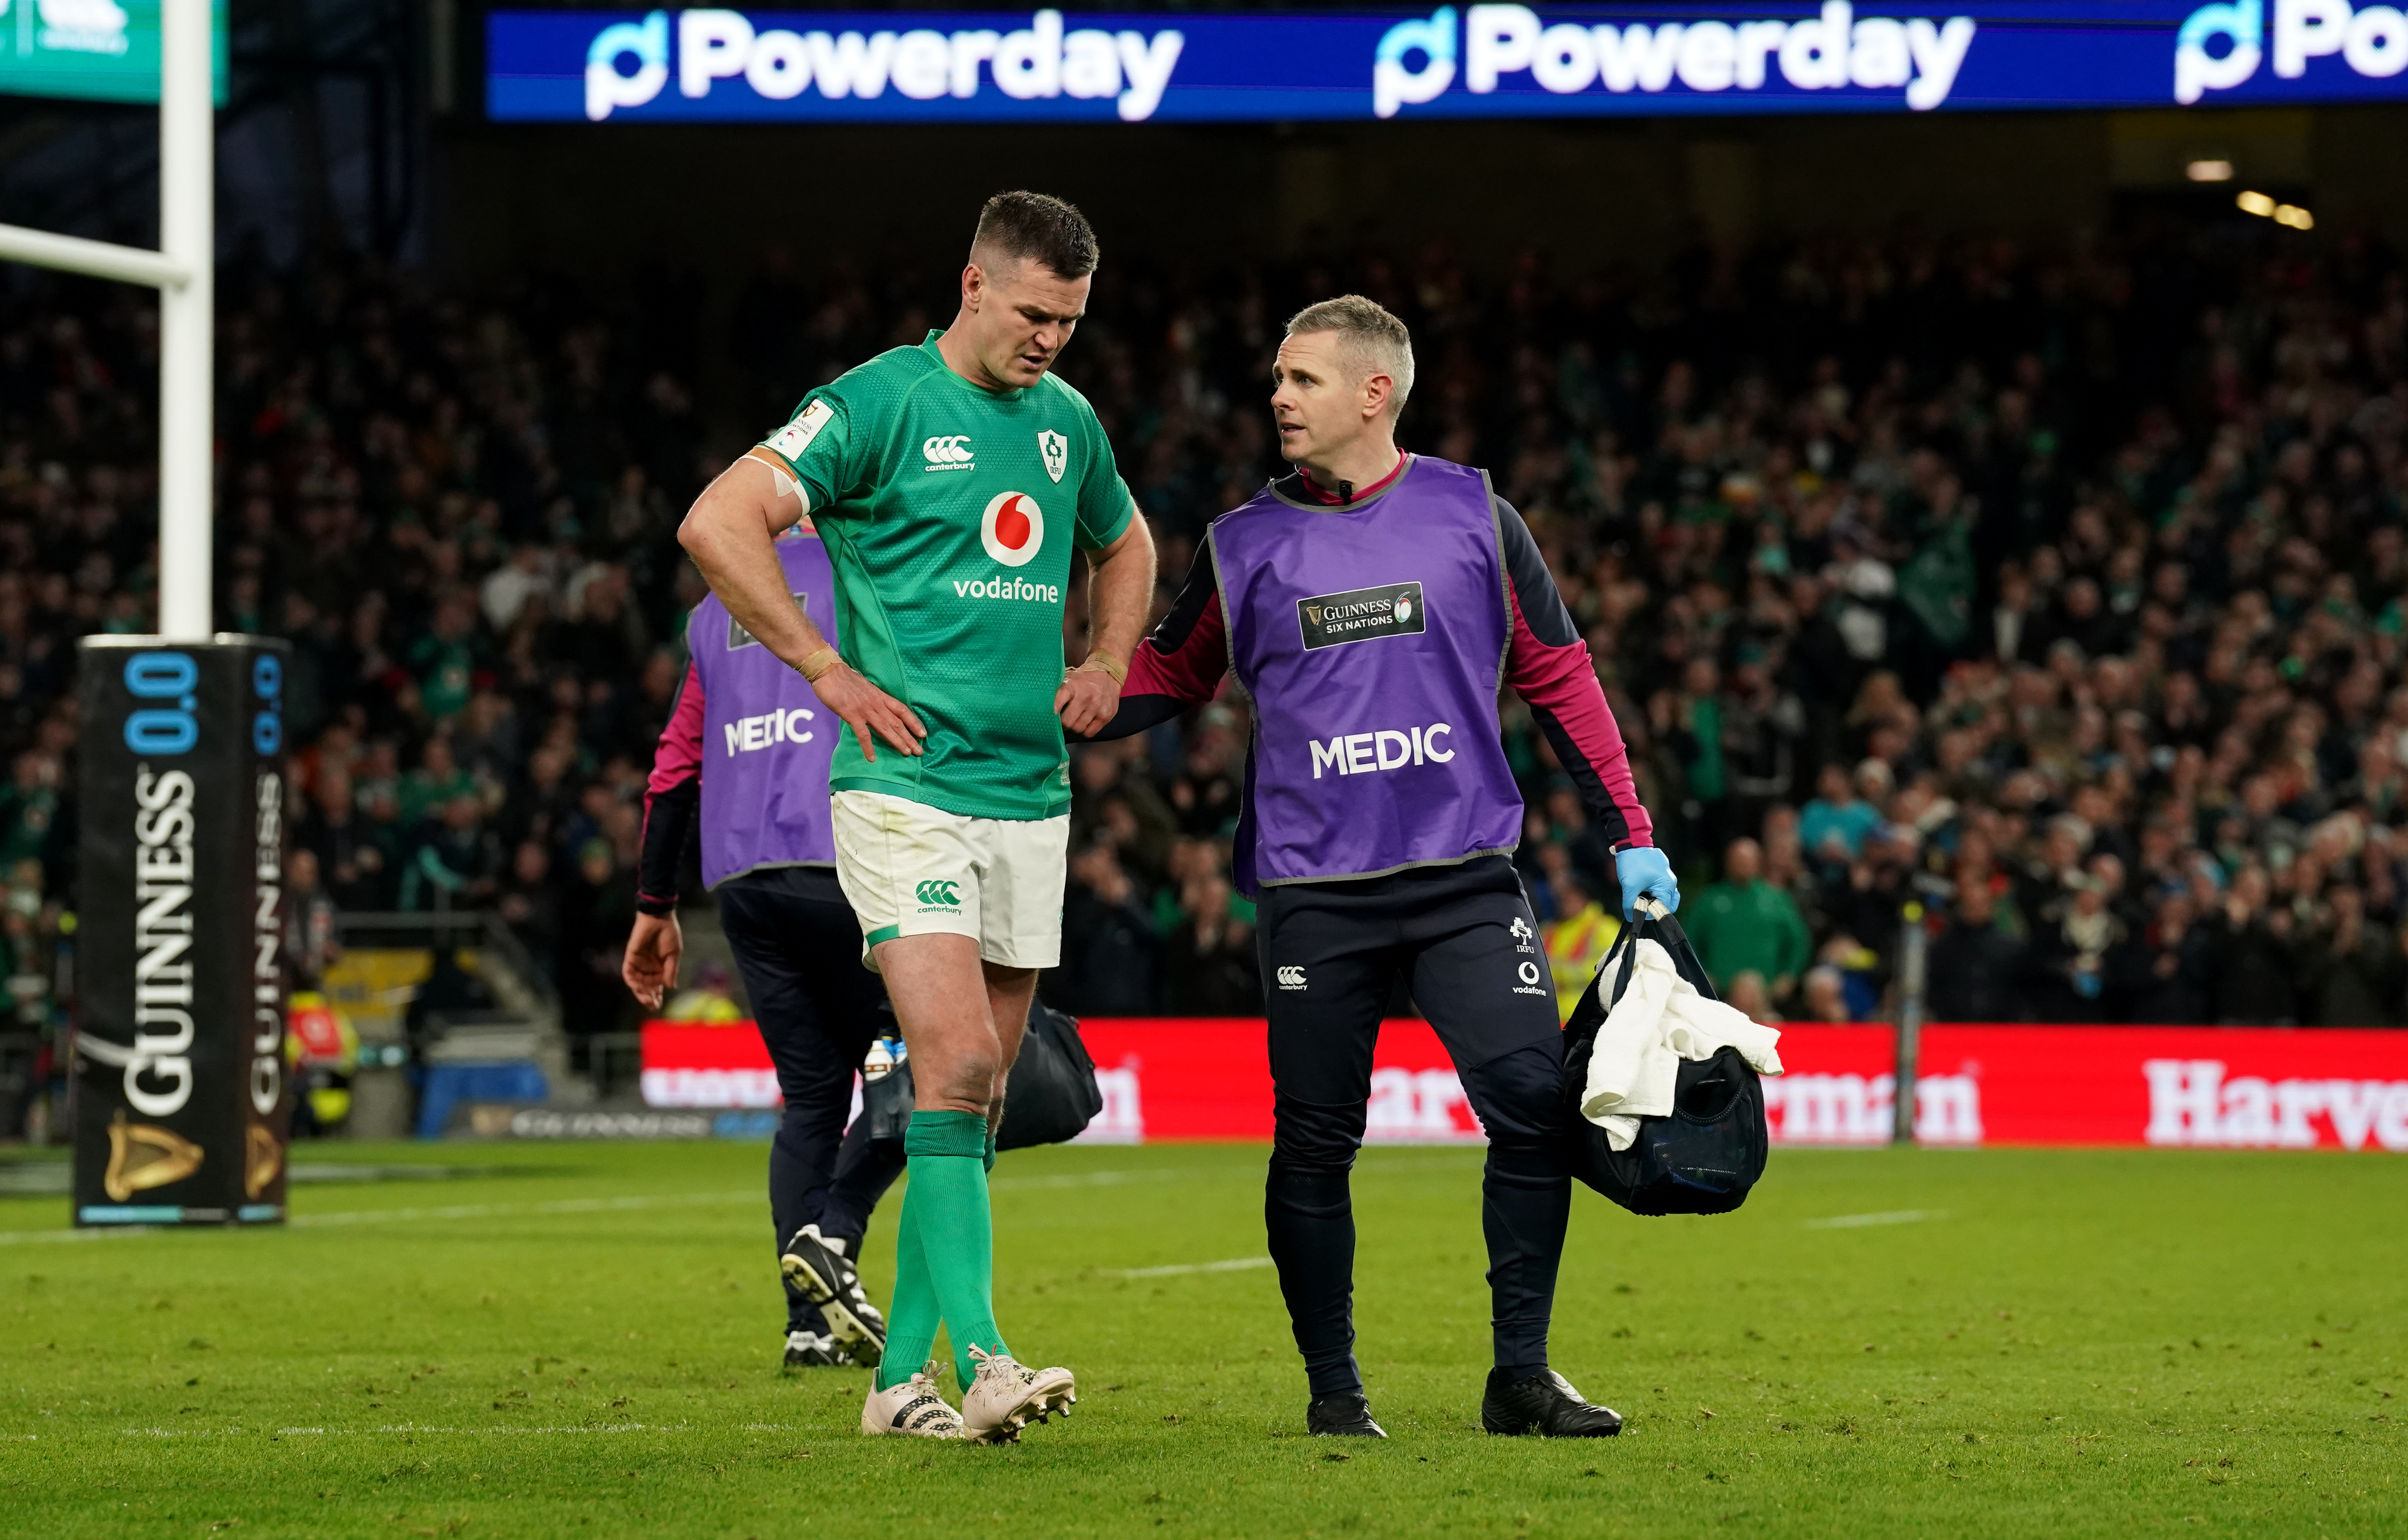 Ireland captain Johnny Sexton has not played since being injured against England in March